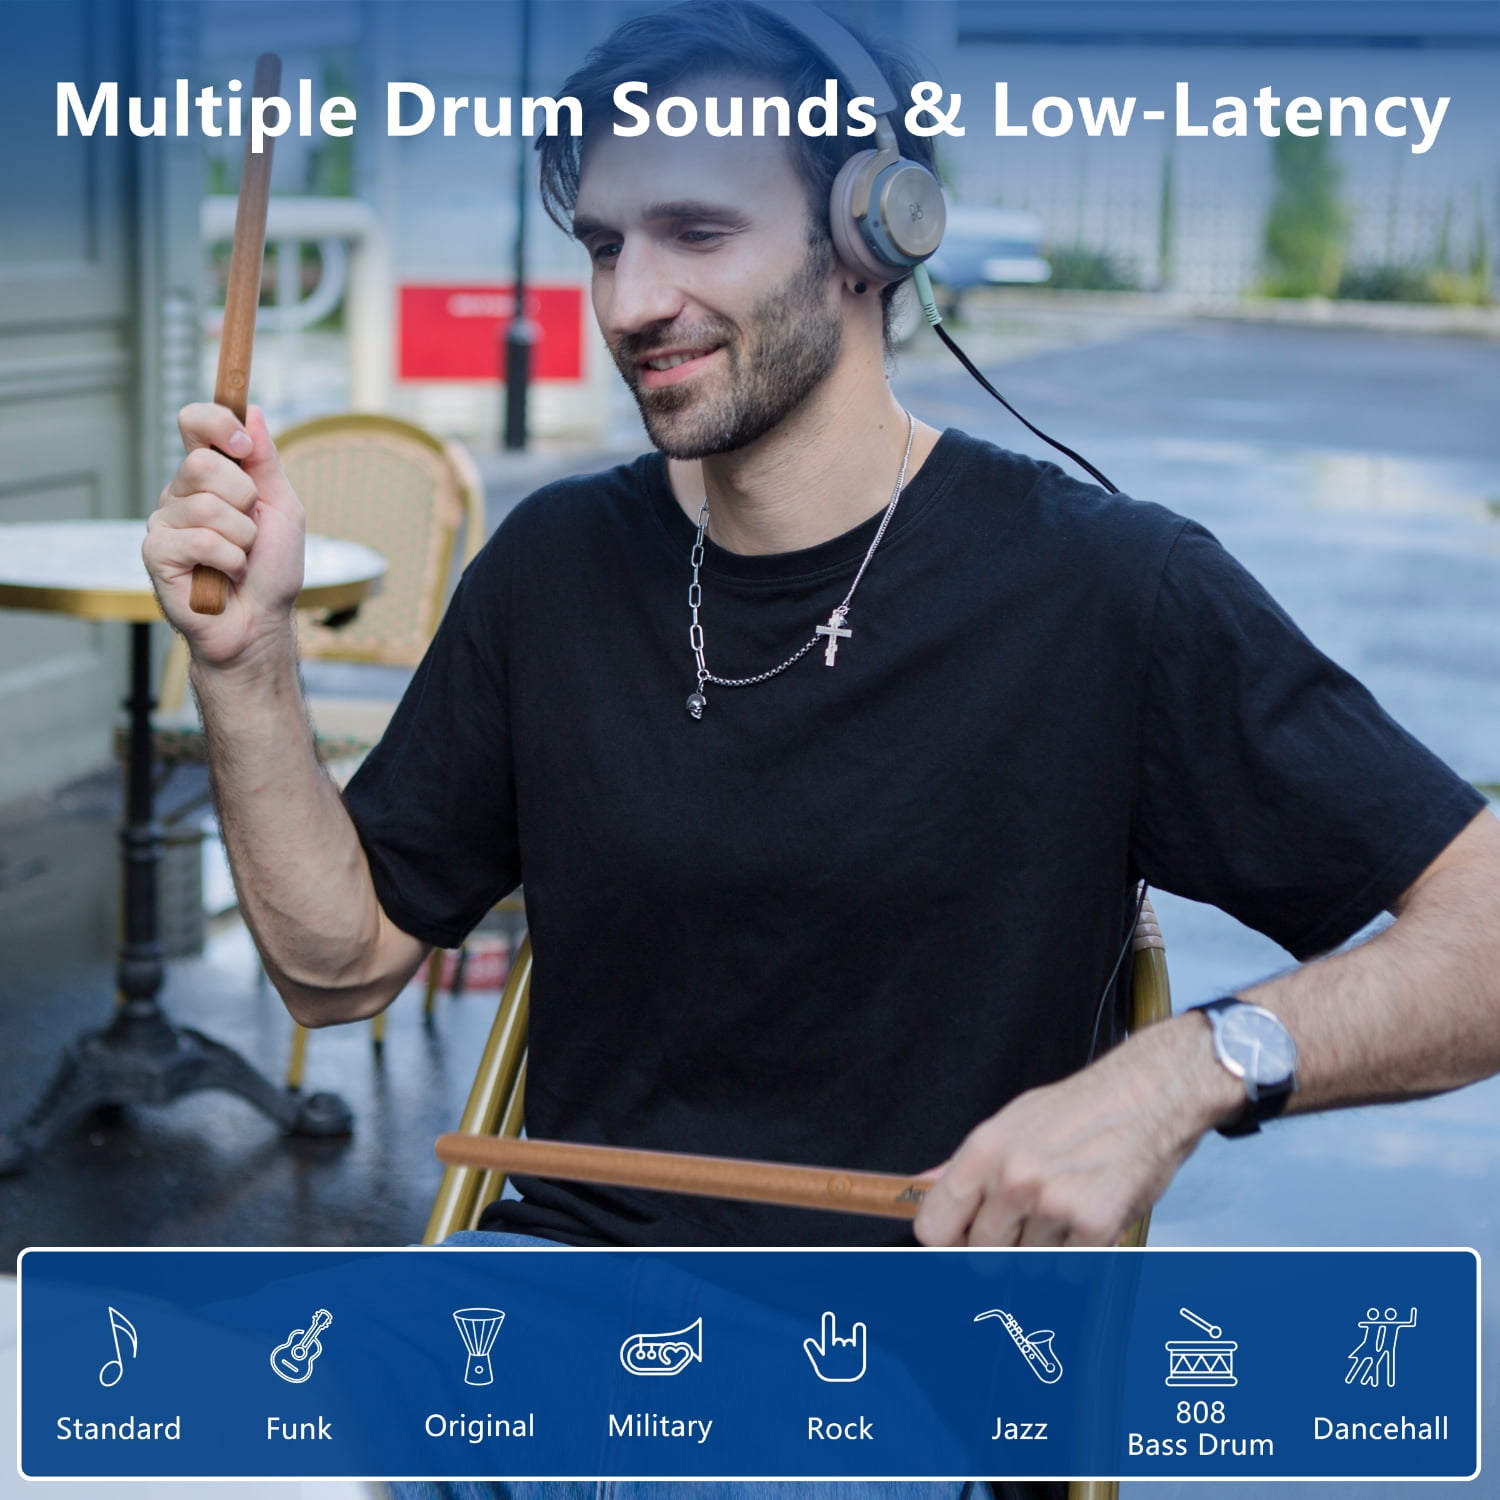 AeroBand PocketDrum 2 Plus Electric Air Drum Set Drumsticks, Pedals,  Bluetooth, USB MIDI Function, for Adults, Kids, Professionals, Gift 